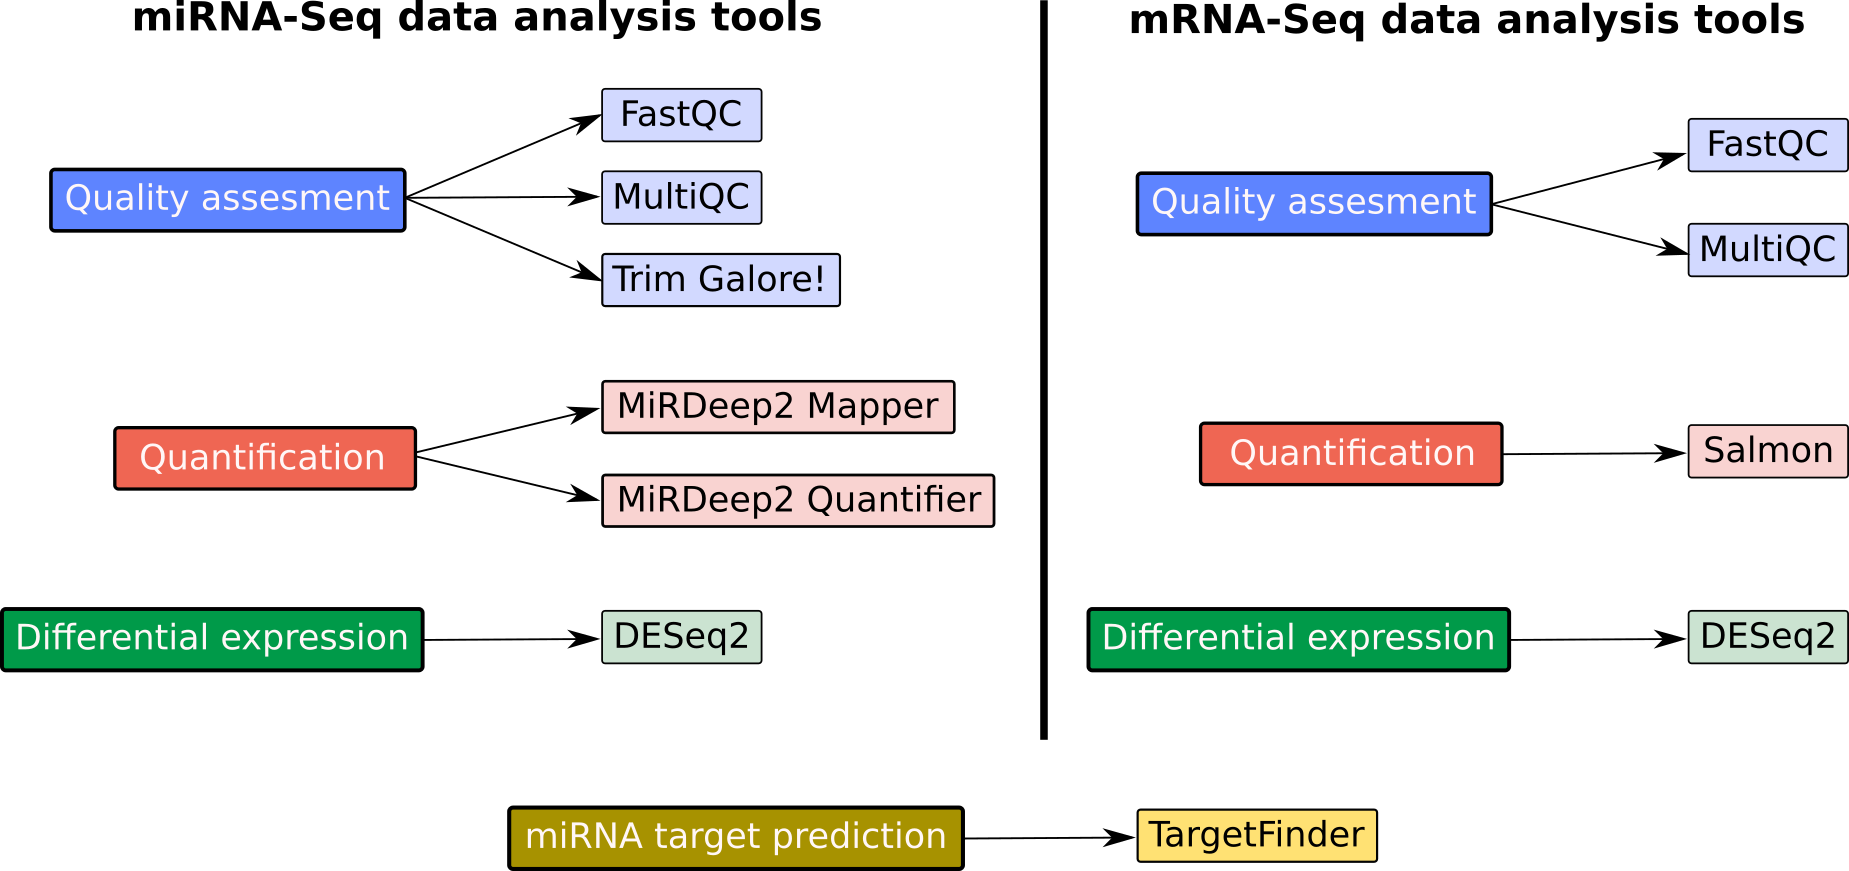 Tools used in the analysis